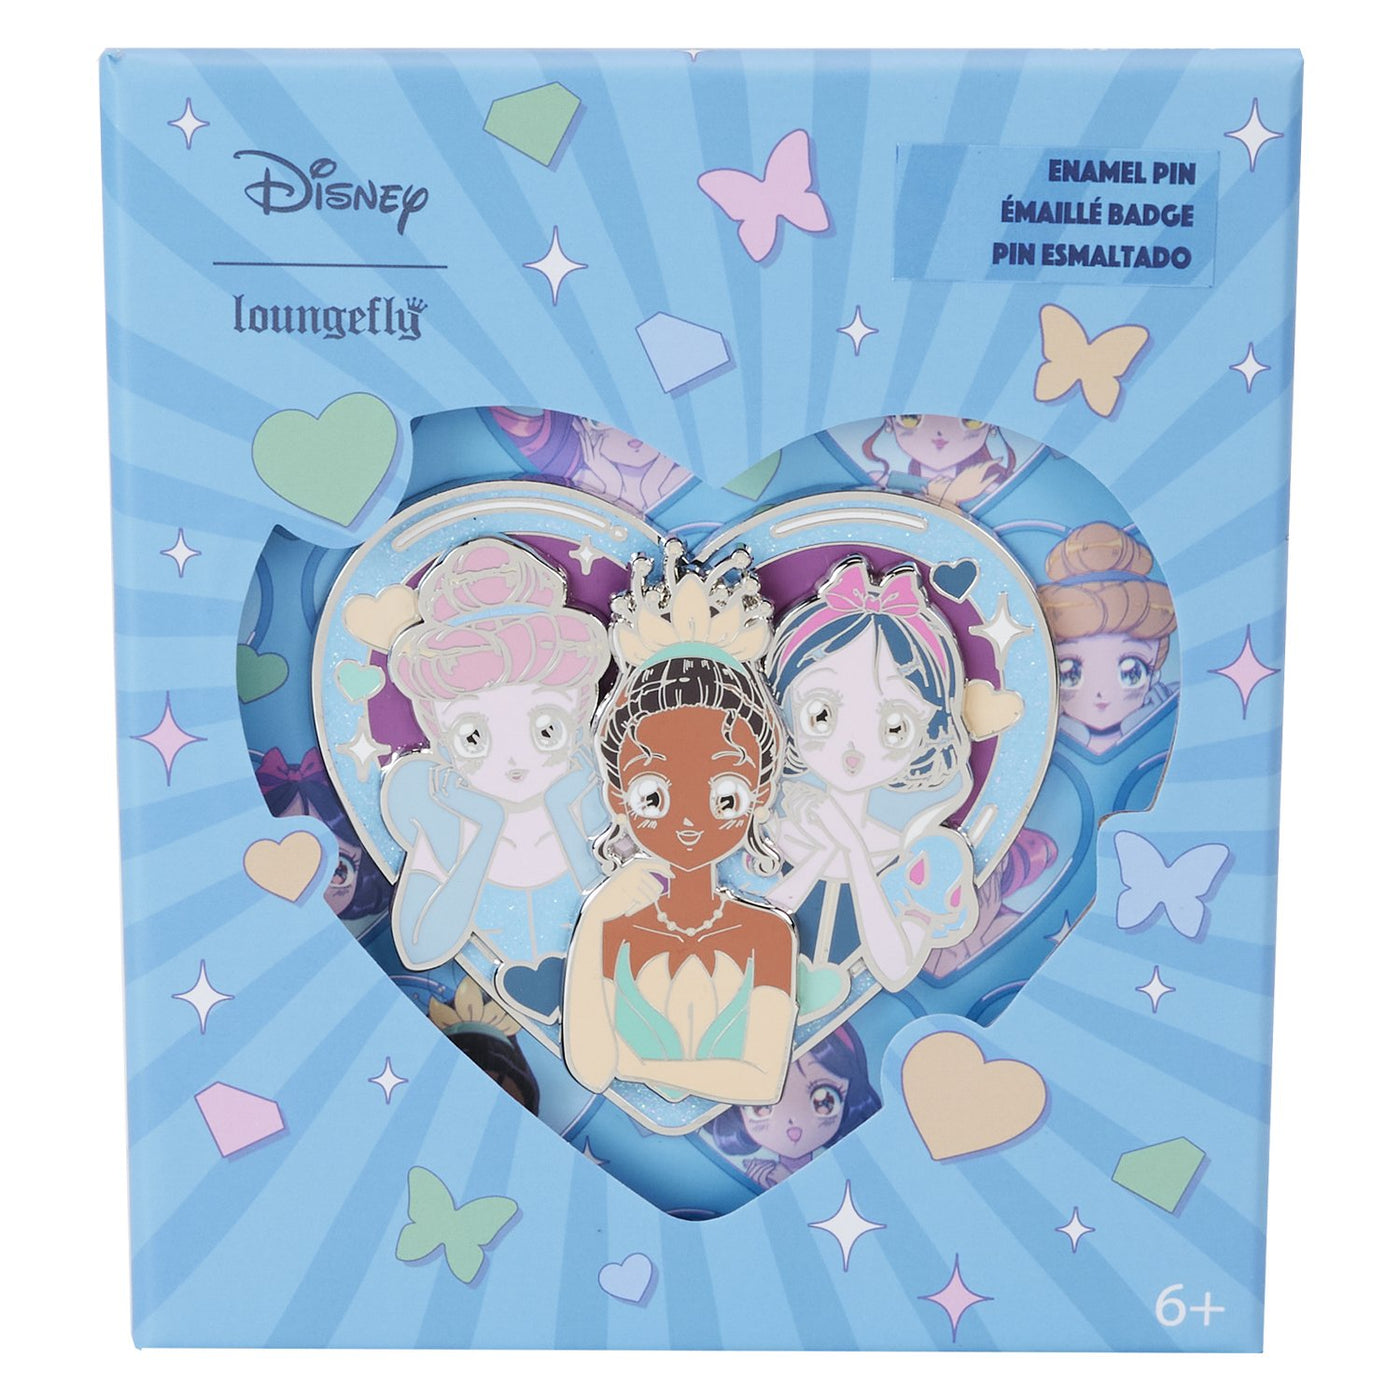 Loungefly Disney Princess Manga Style 3" Collector Box Pin - Front Packaging